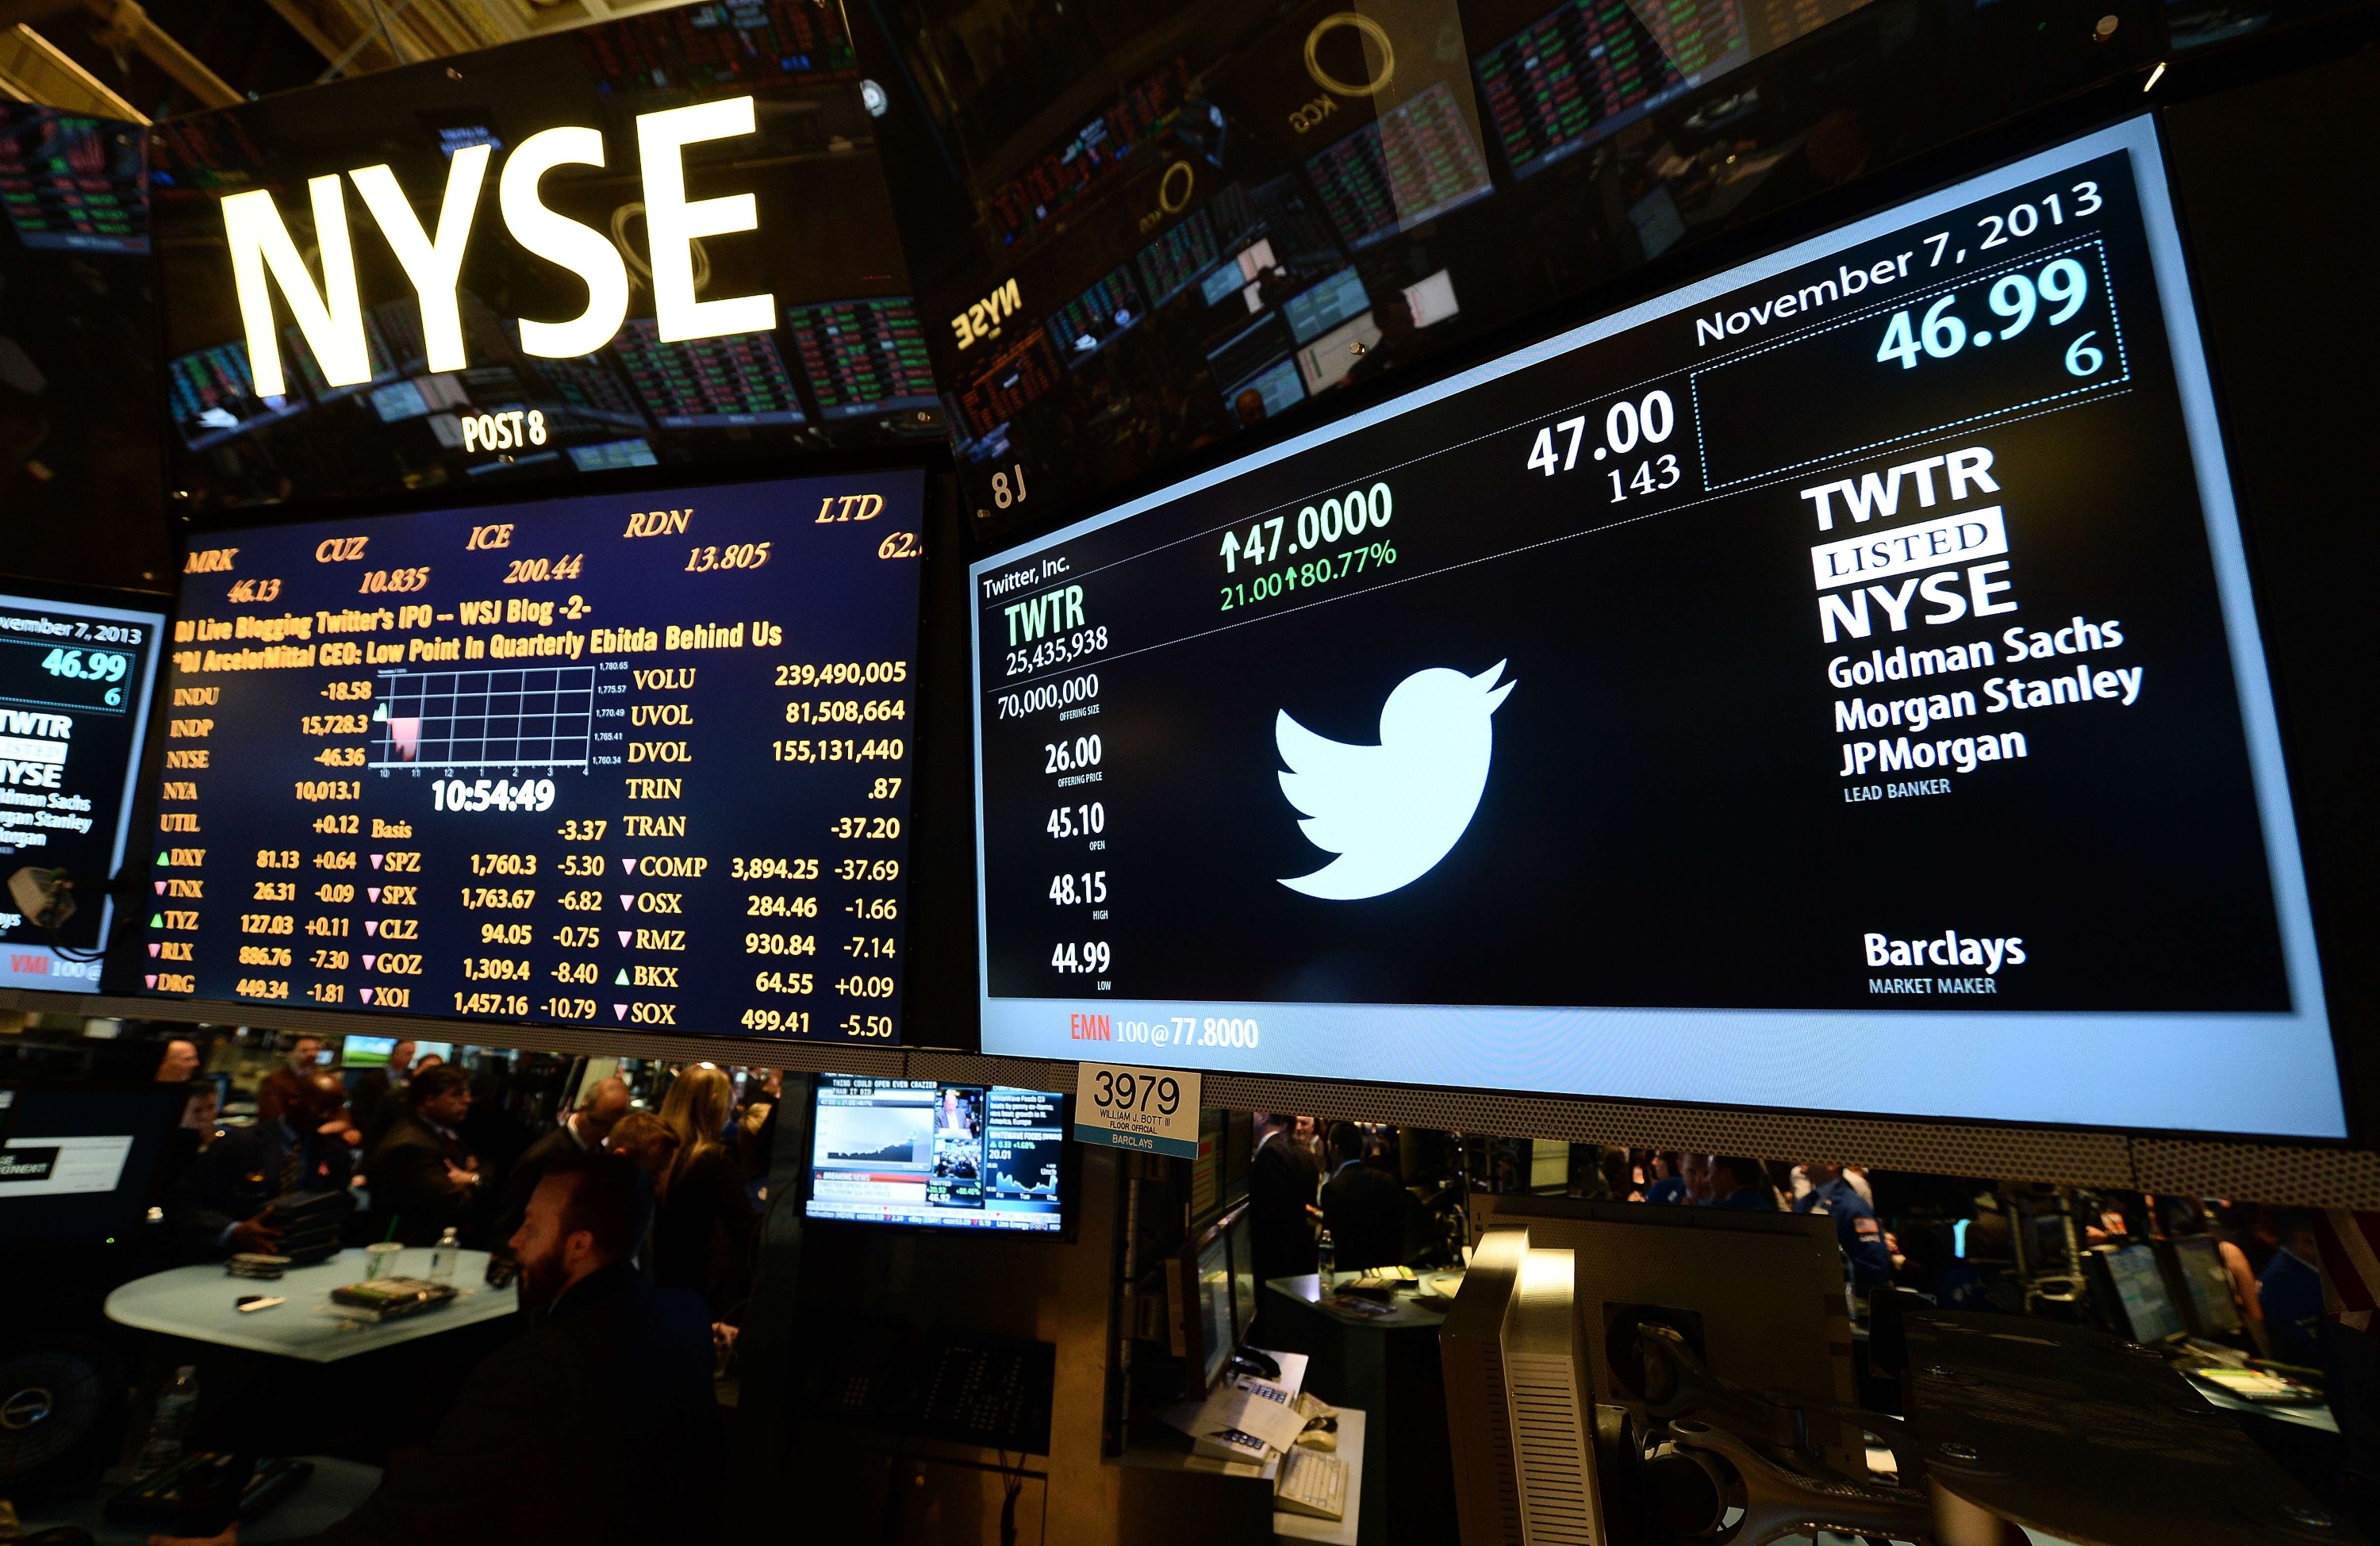 A screen displays a Twitter and share price logo as it starts trading at the New York Stock Exchange (NYSE) on November 7, 2013 in New York. Twitter hit Wall Street with a bang on Thursday, as an investor frenzy quickly sent shares surging after the public share offering for the fast-growing social network. In the first exchanges, Twitter vaulted 80.7 percent to $47, a day after the initial public offering (IPO) at $26 per share. While some analysts cautioned about the fast-changing nature of social media, the debut led to a stampede for Twitter shares. AFP PHOTO/EMMANUEL DUNANDEMMANUEL DUNAND/AFP/Getty Images ORG XMIT: 187363780